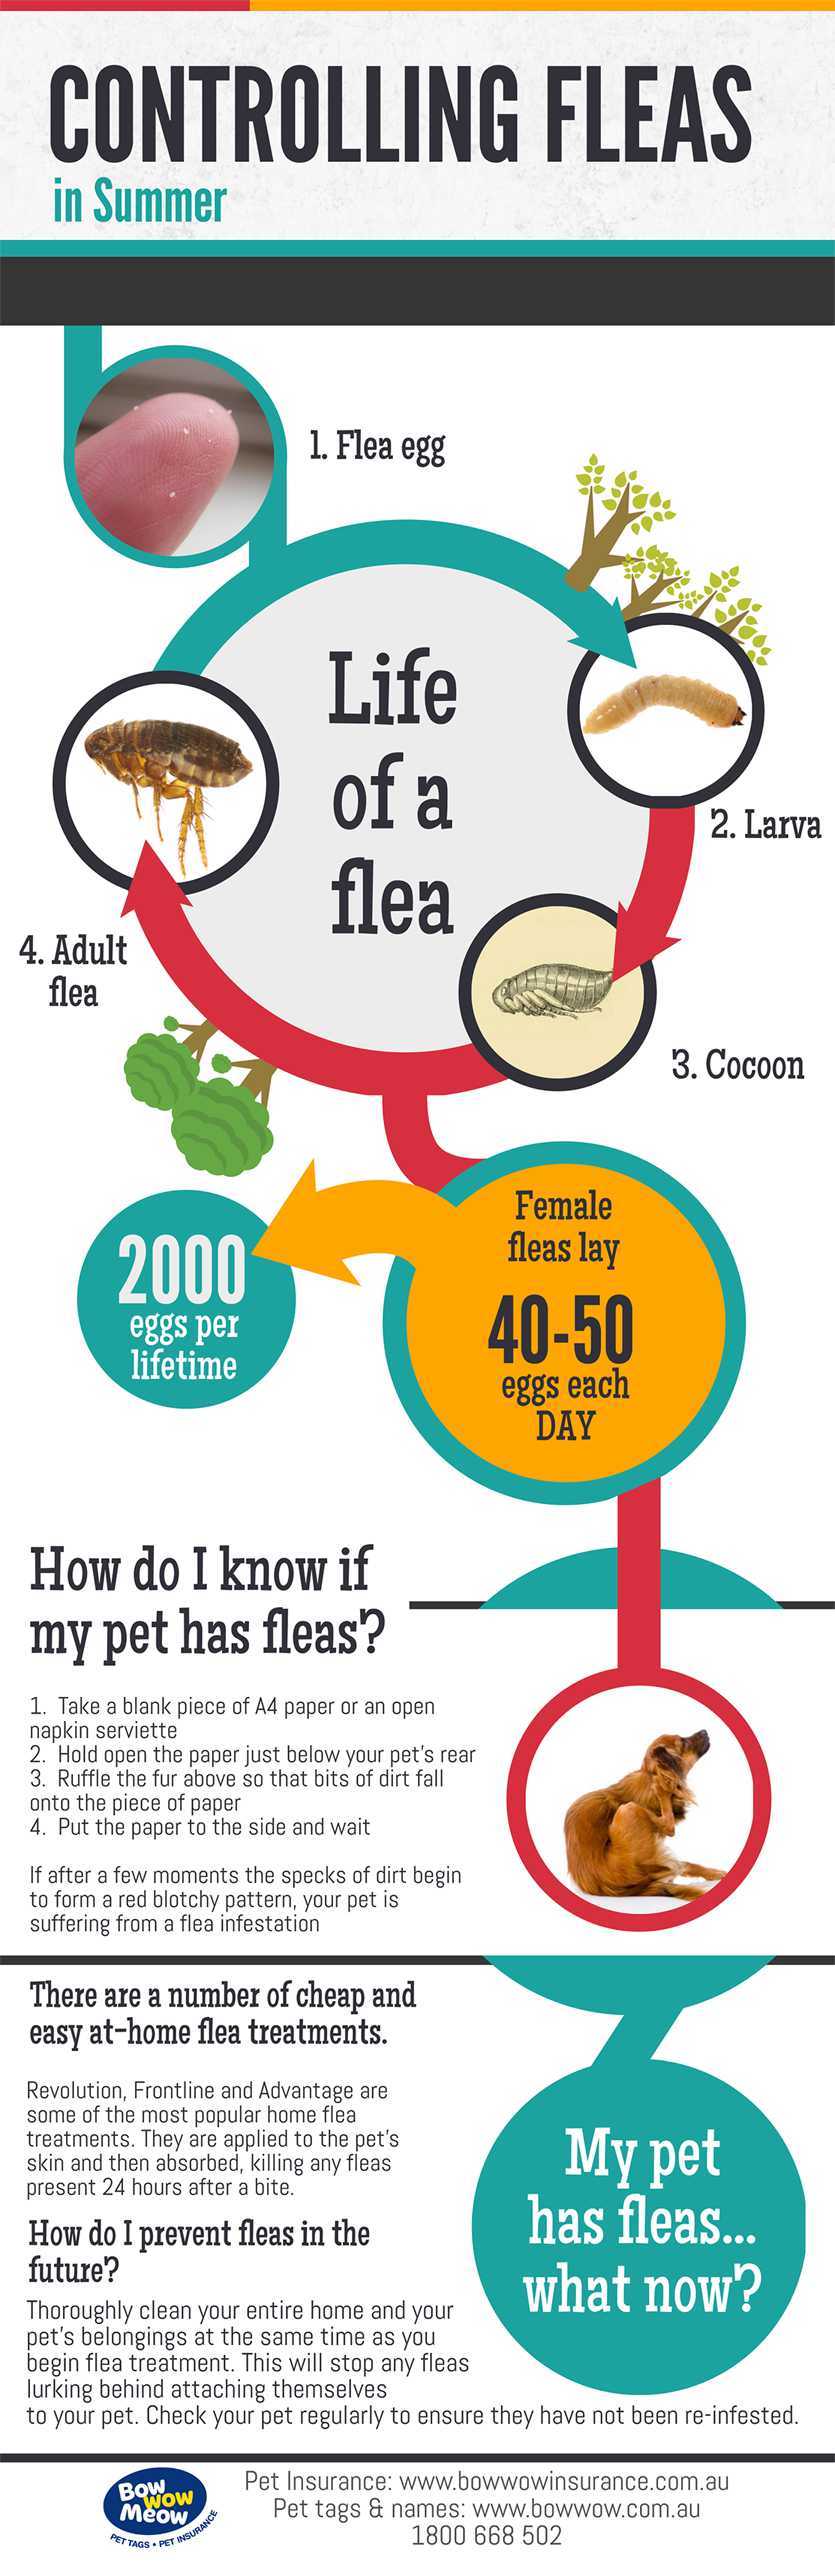 How to prevent leas on your pet this summer? Cheap and easy at home flea treatments. Prevent fleas in future. Life of a flea.